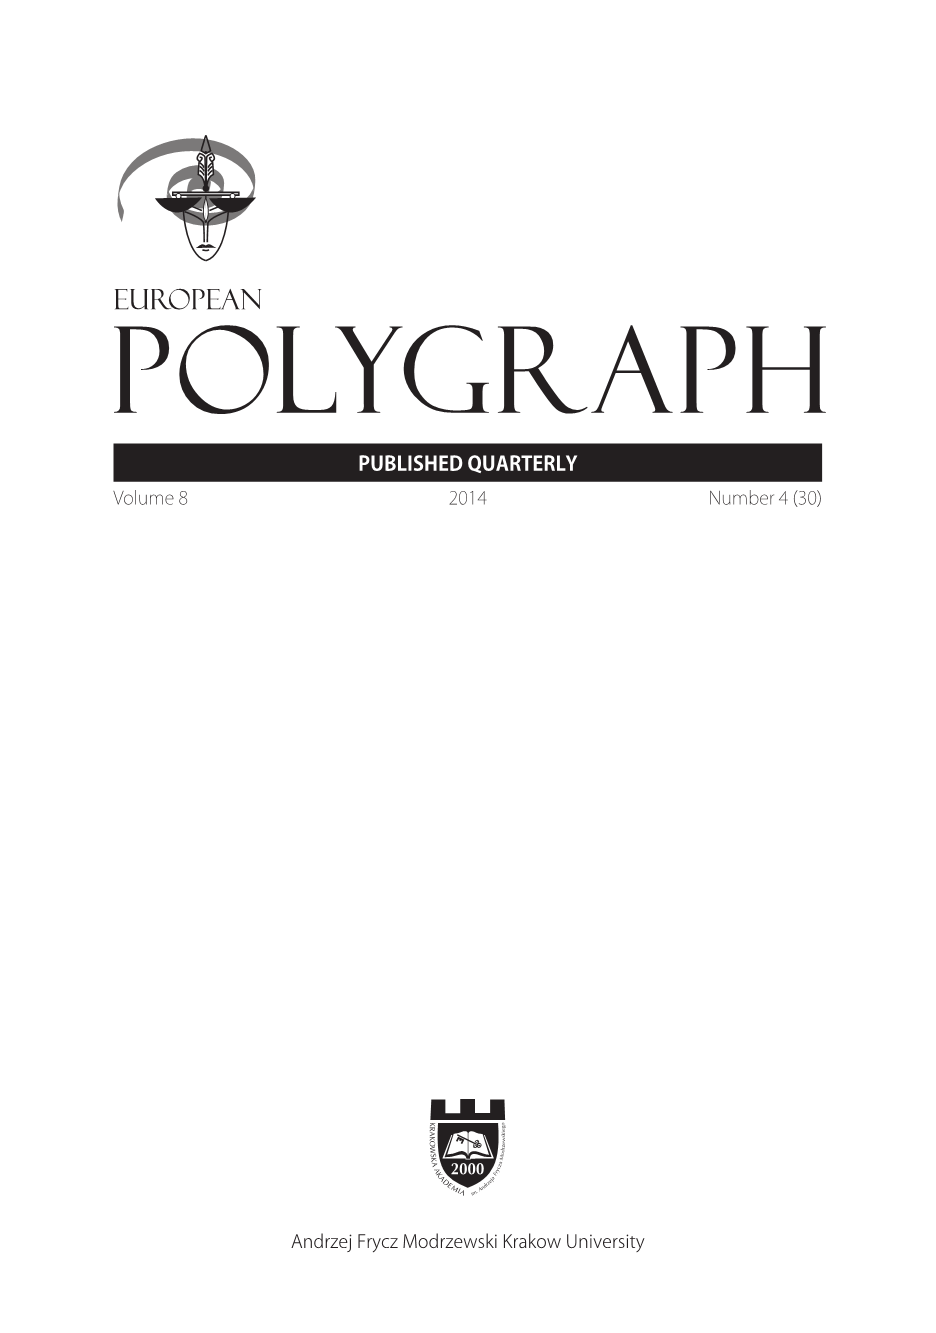 Selected Problems in Evaluation of Polygraph Examination Results